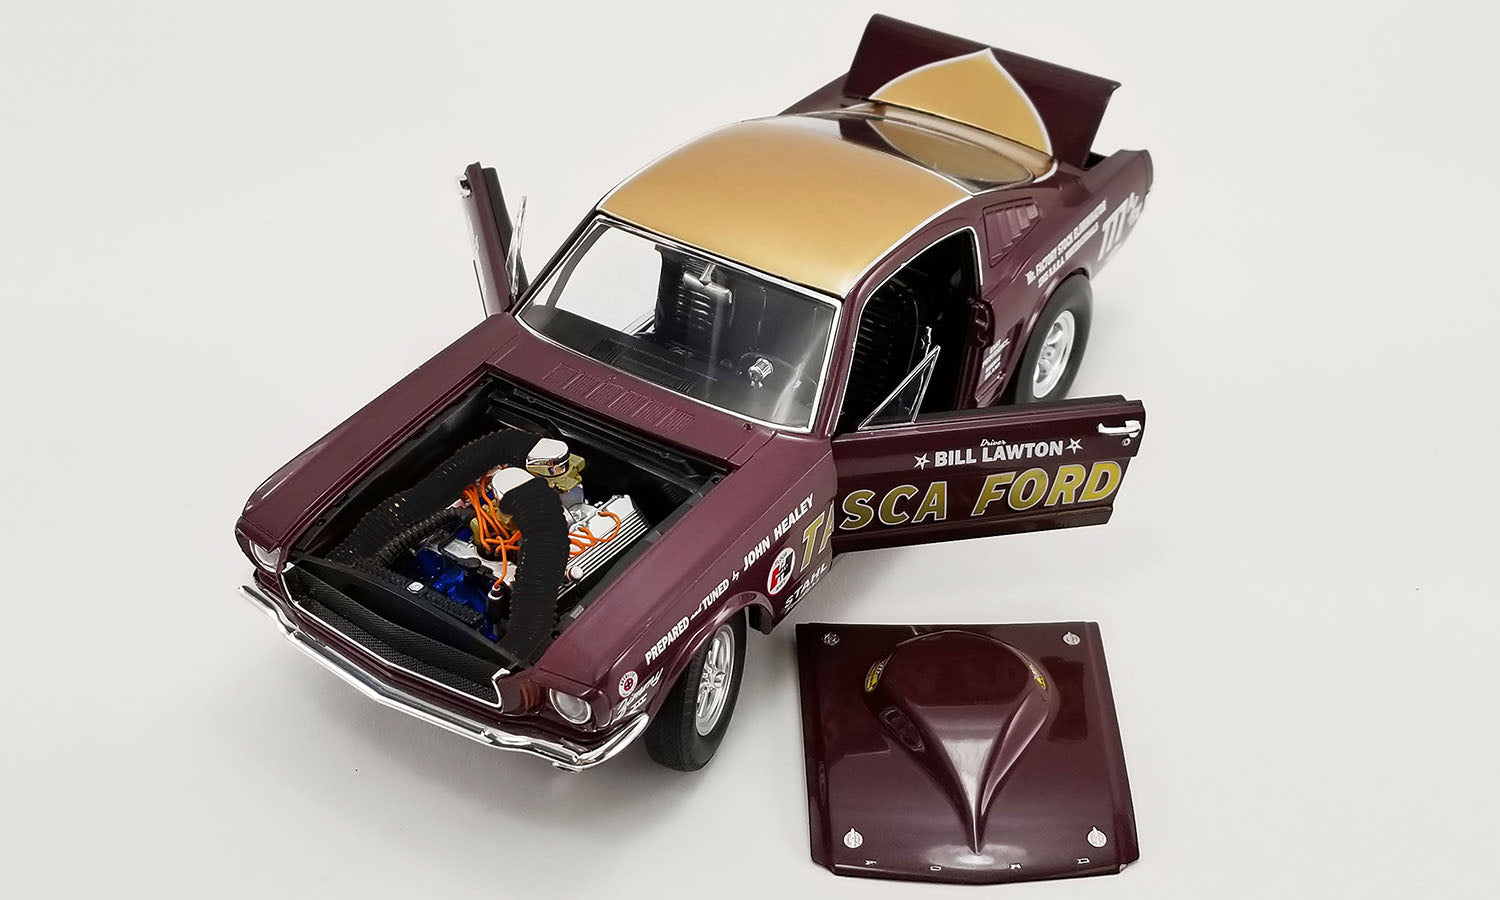 1965 Ford Mustang A/FX - Tasca Ford 1:18 Acme – Desktop Muscle